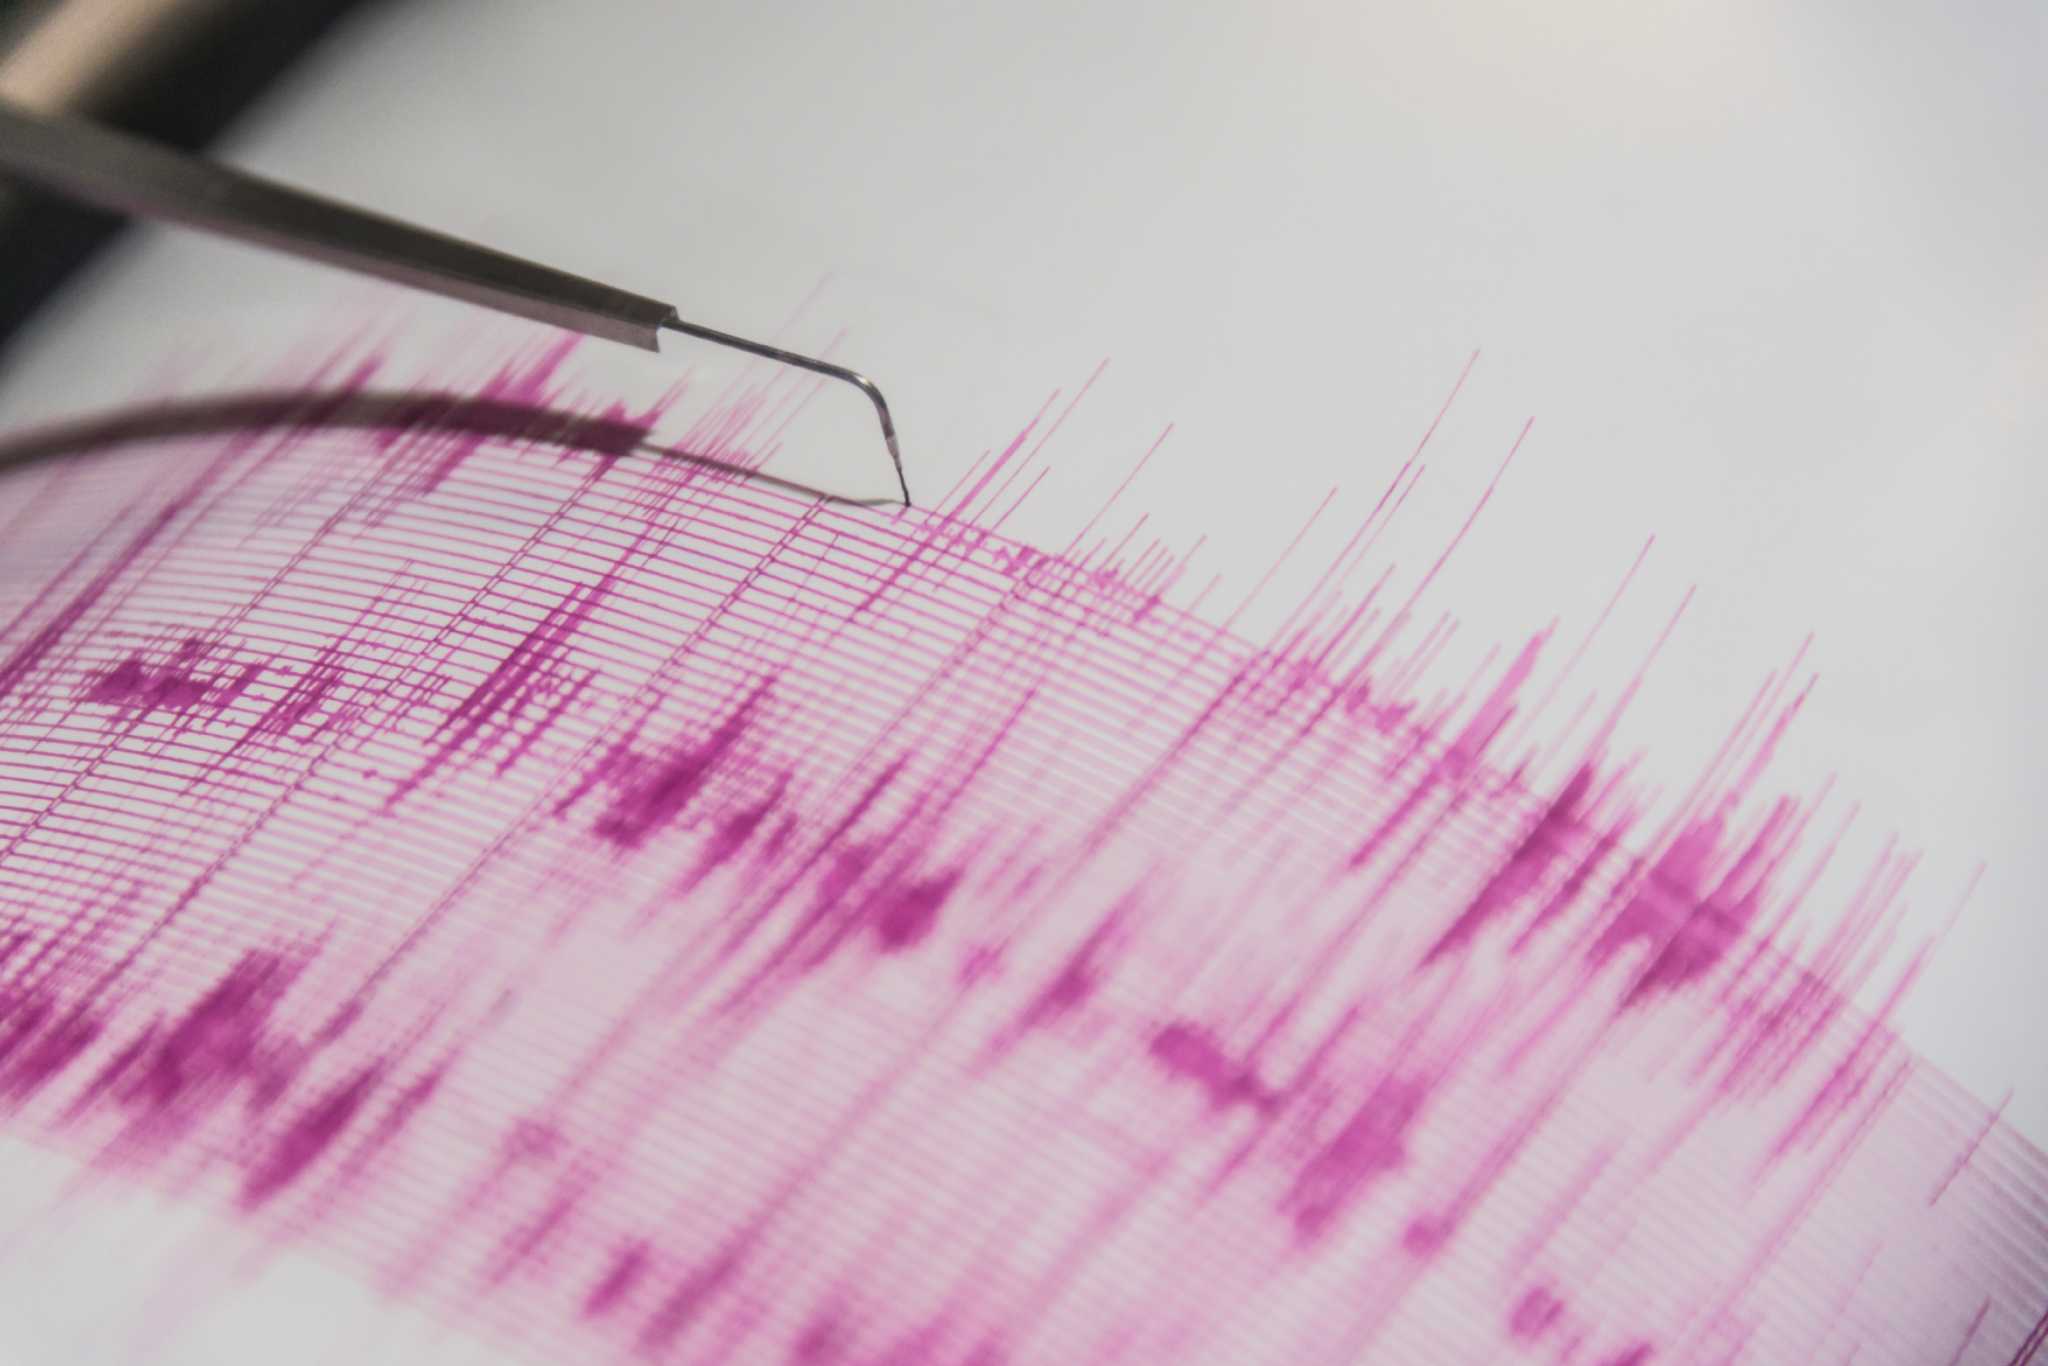 whats earthquake weather and how can i use it to predict earthquakes